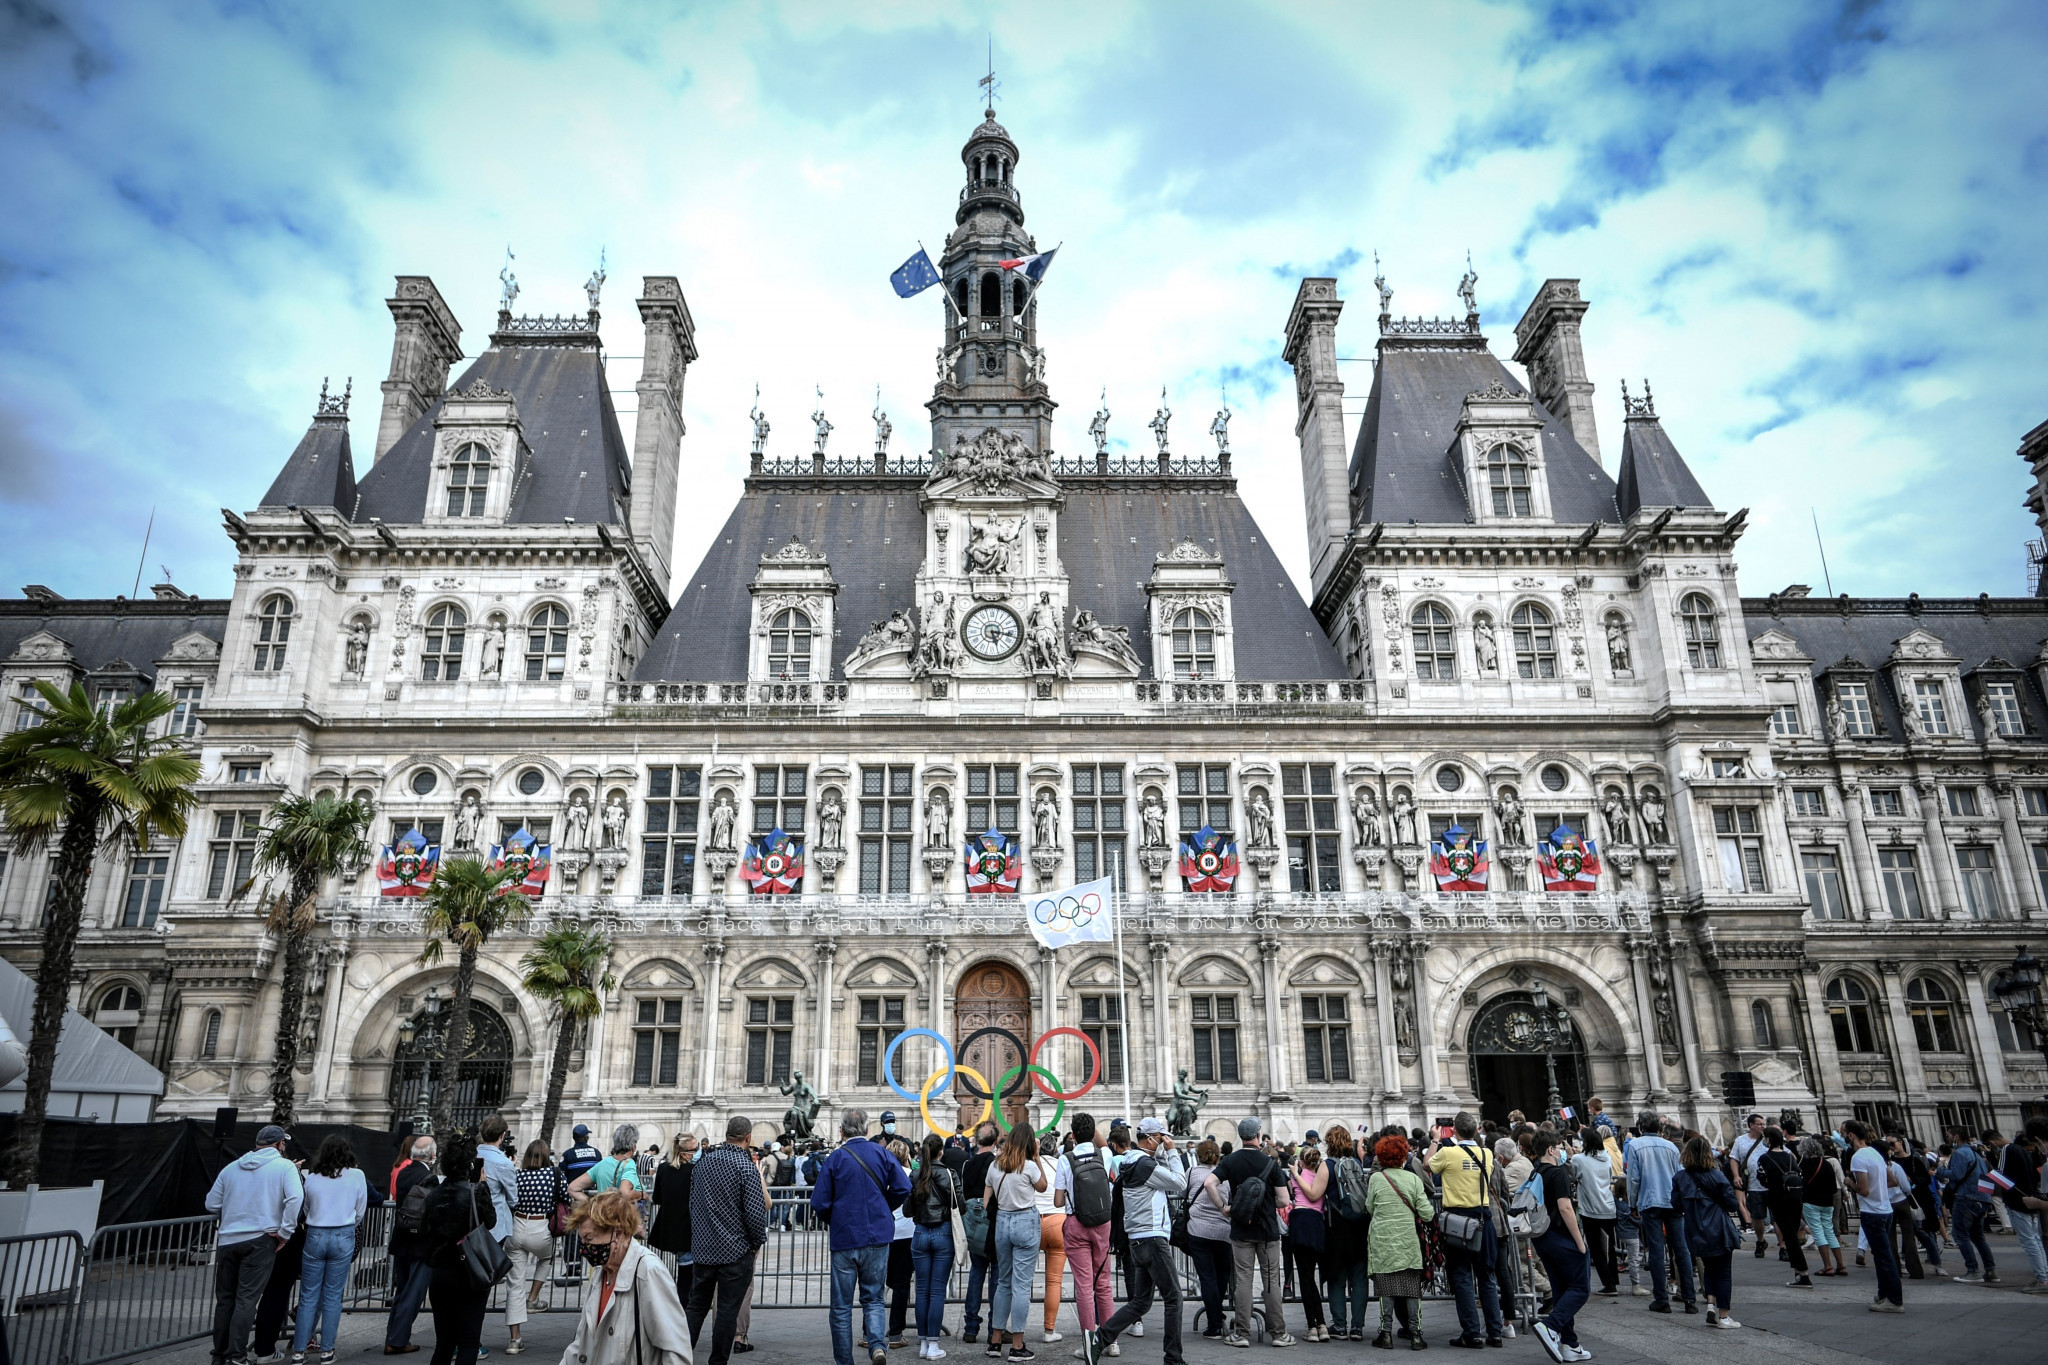 Hôtel de Ville will feature on the marathon and road cycling routes ©Getty Images